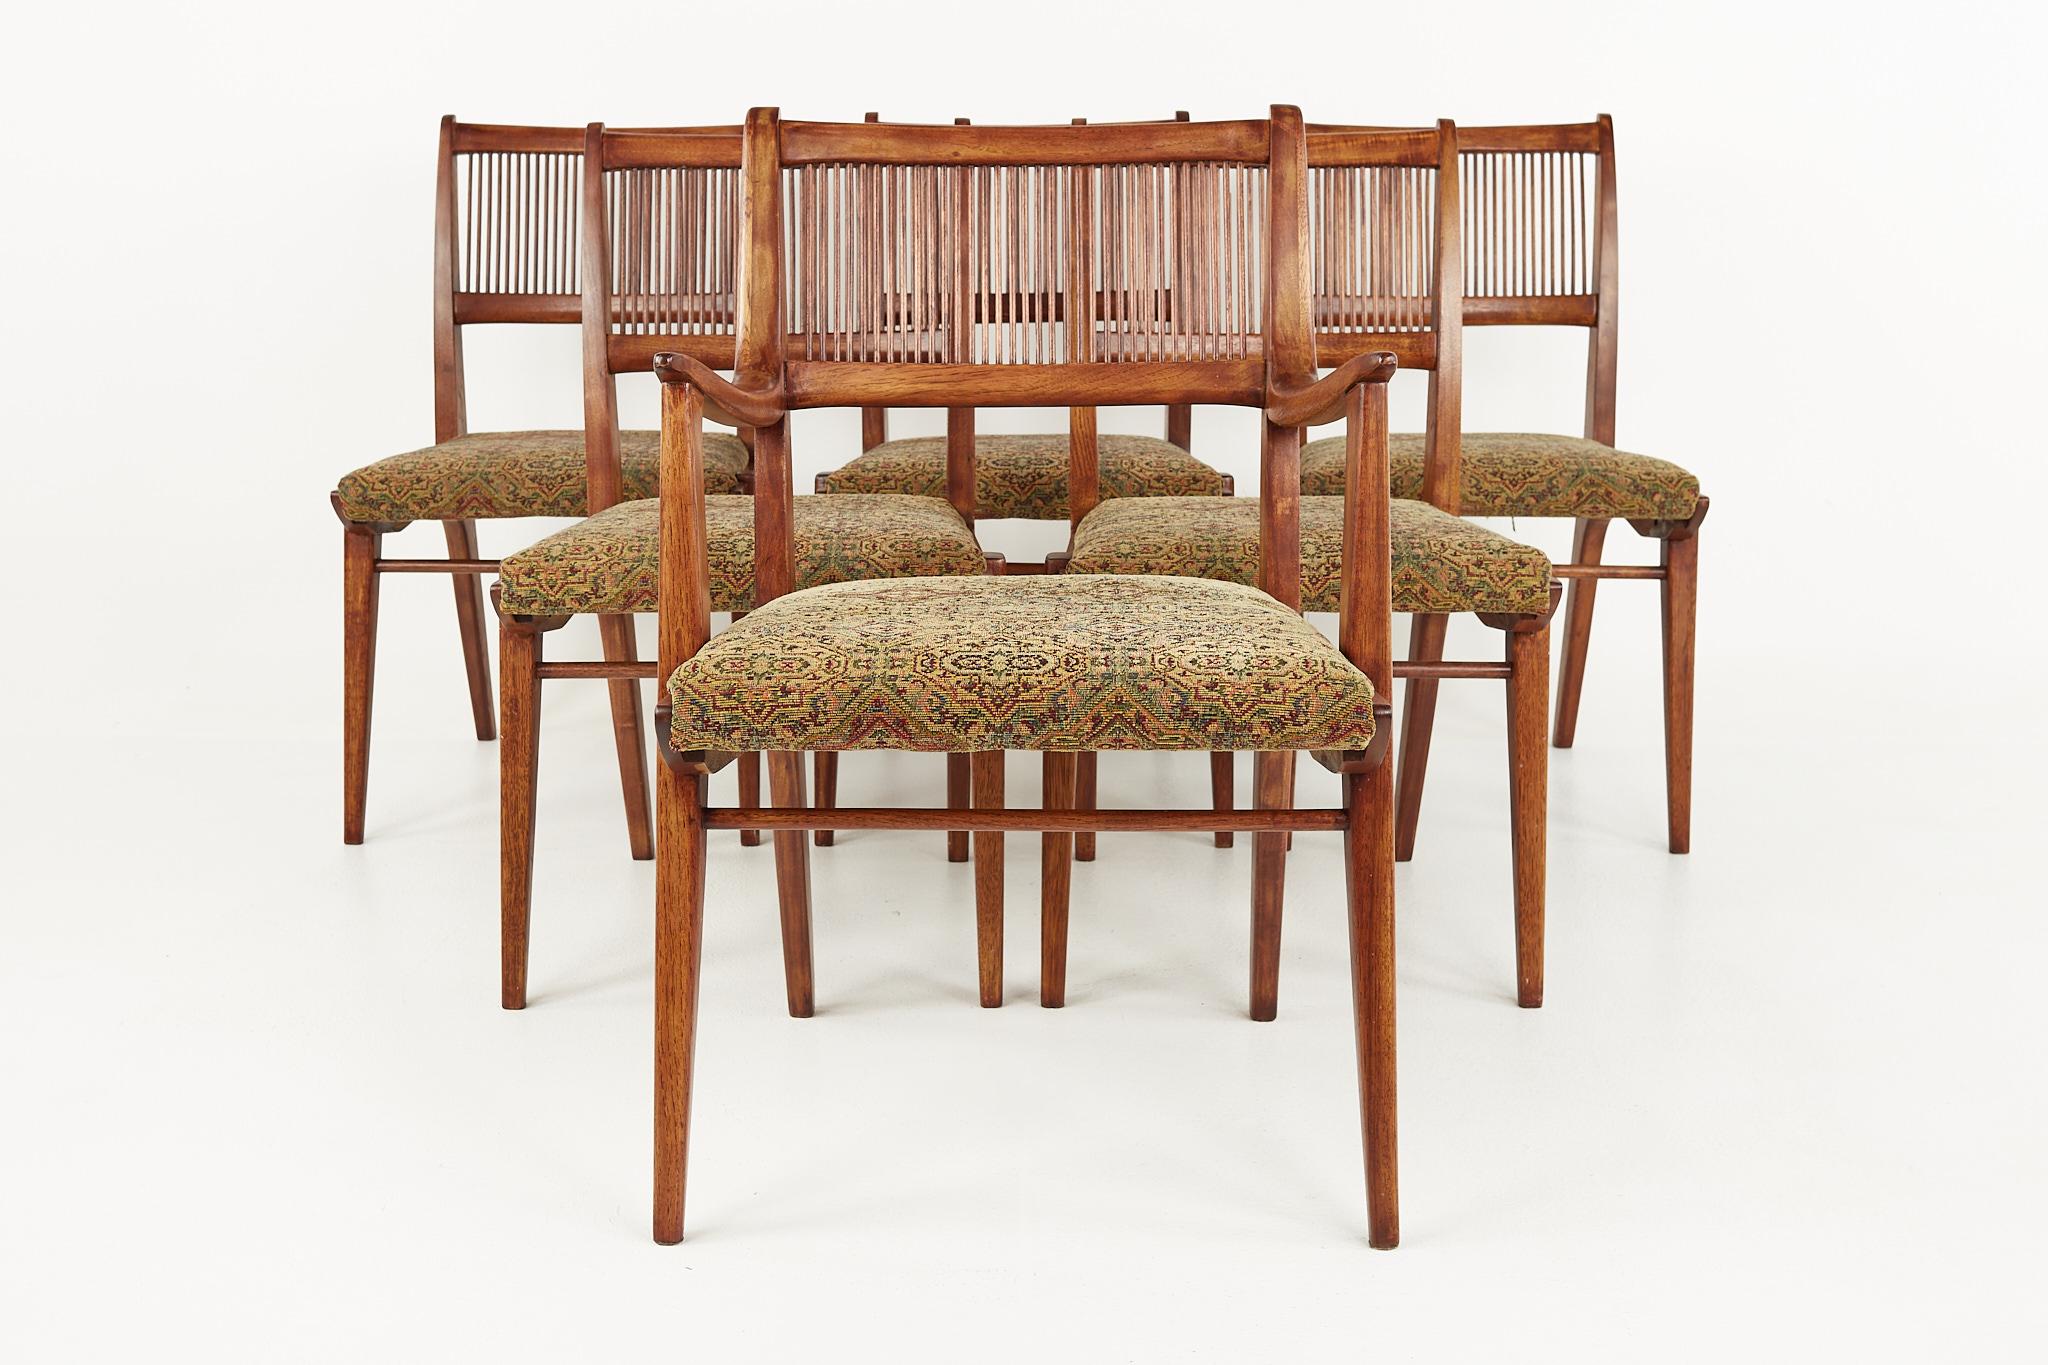 John Van Koert for Drexel mid century walnut dining chairs - Set of 6 

Each chair measures: 22.5 wide x 24 deep x 35.5 high, with a seat height of 18.5 inches and arm height/chair clearance of 28 inches

All pieces of furniture can be had in